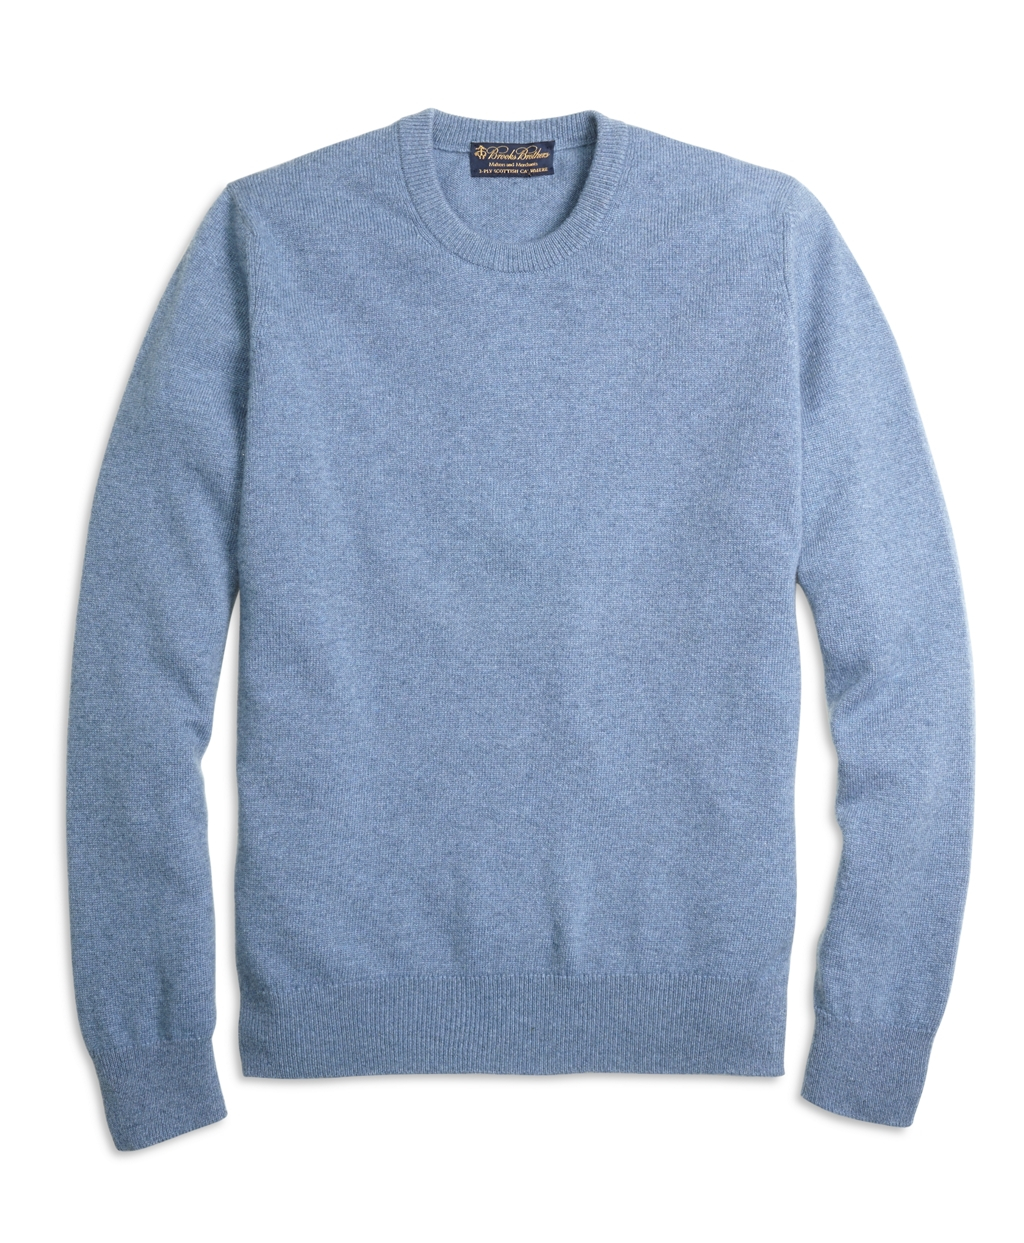 Lyst - Brooks Brothers Cashmere Crewneck Sweater in Blue for Men